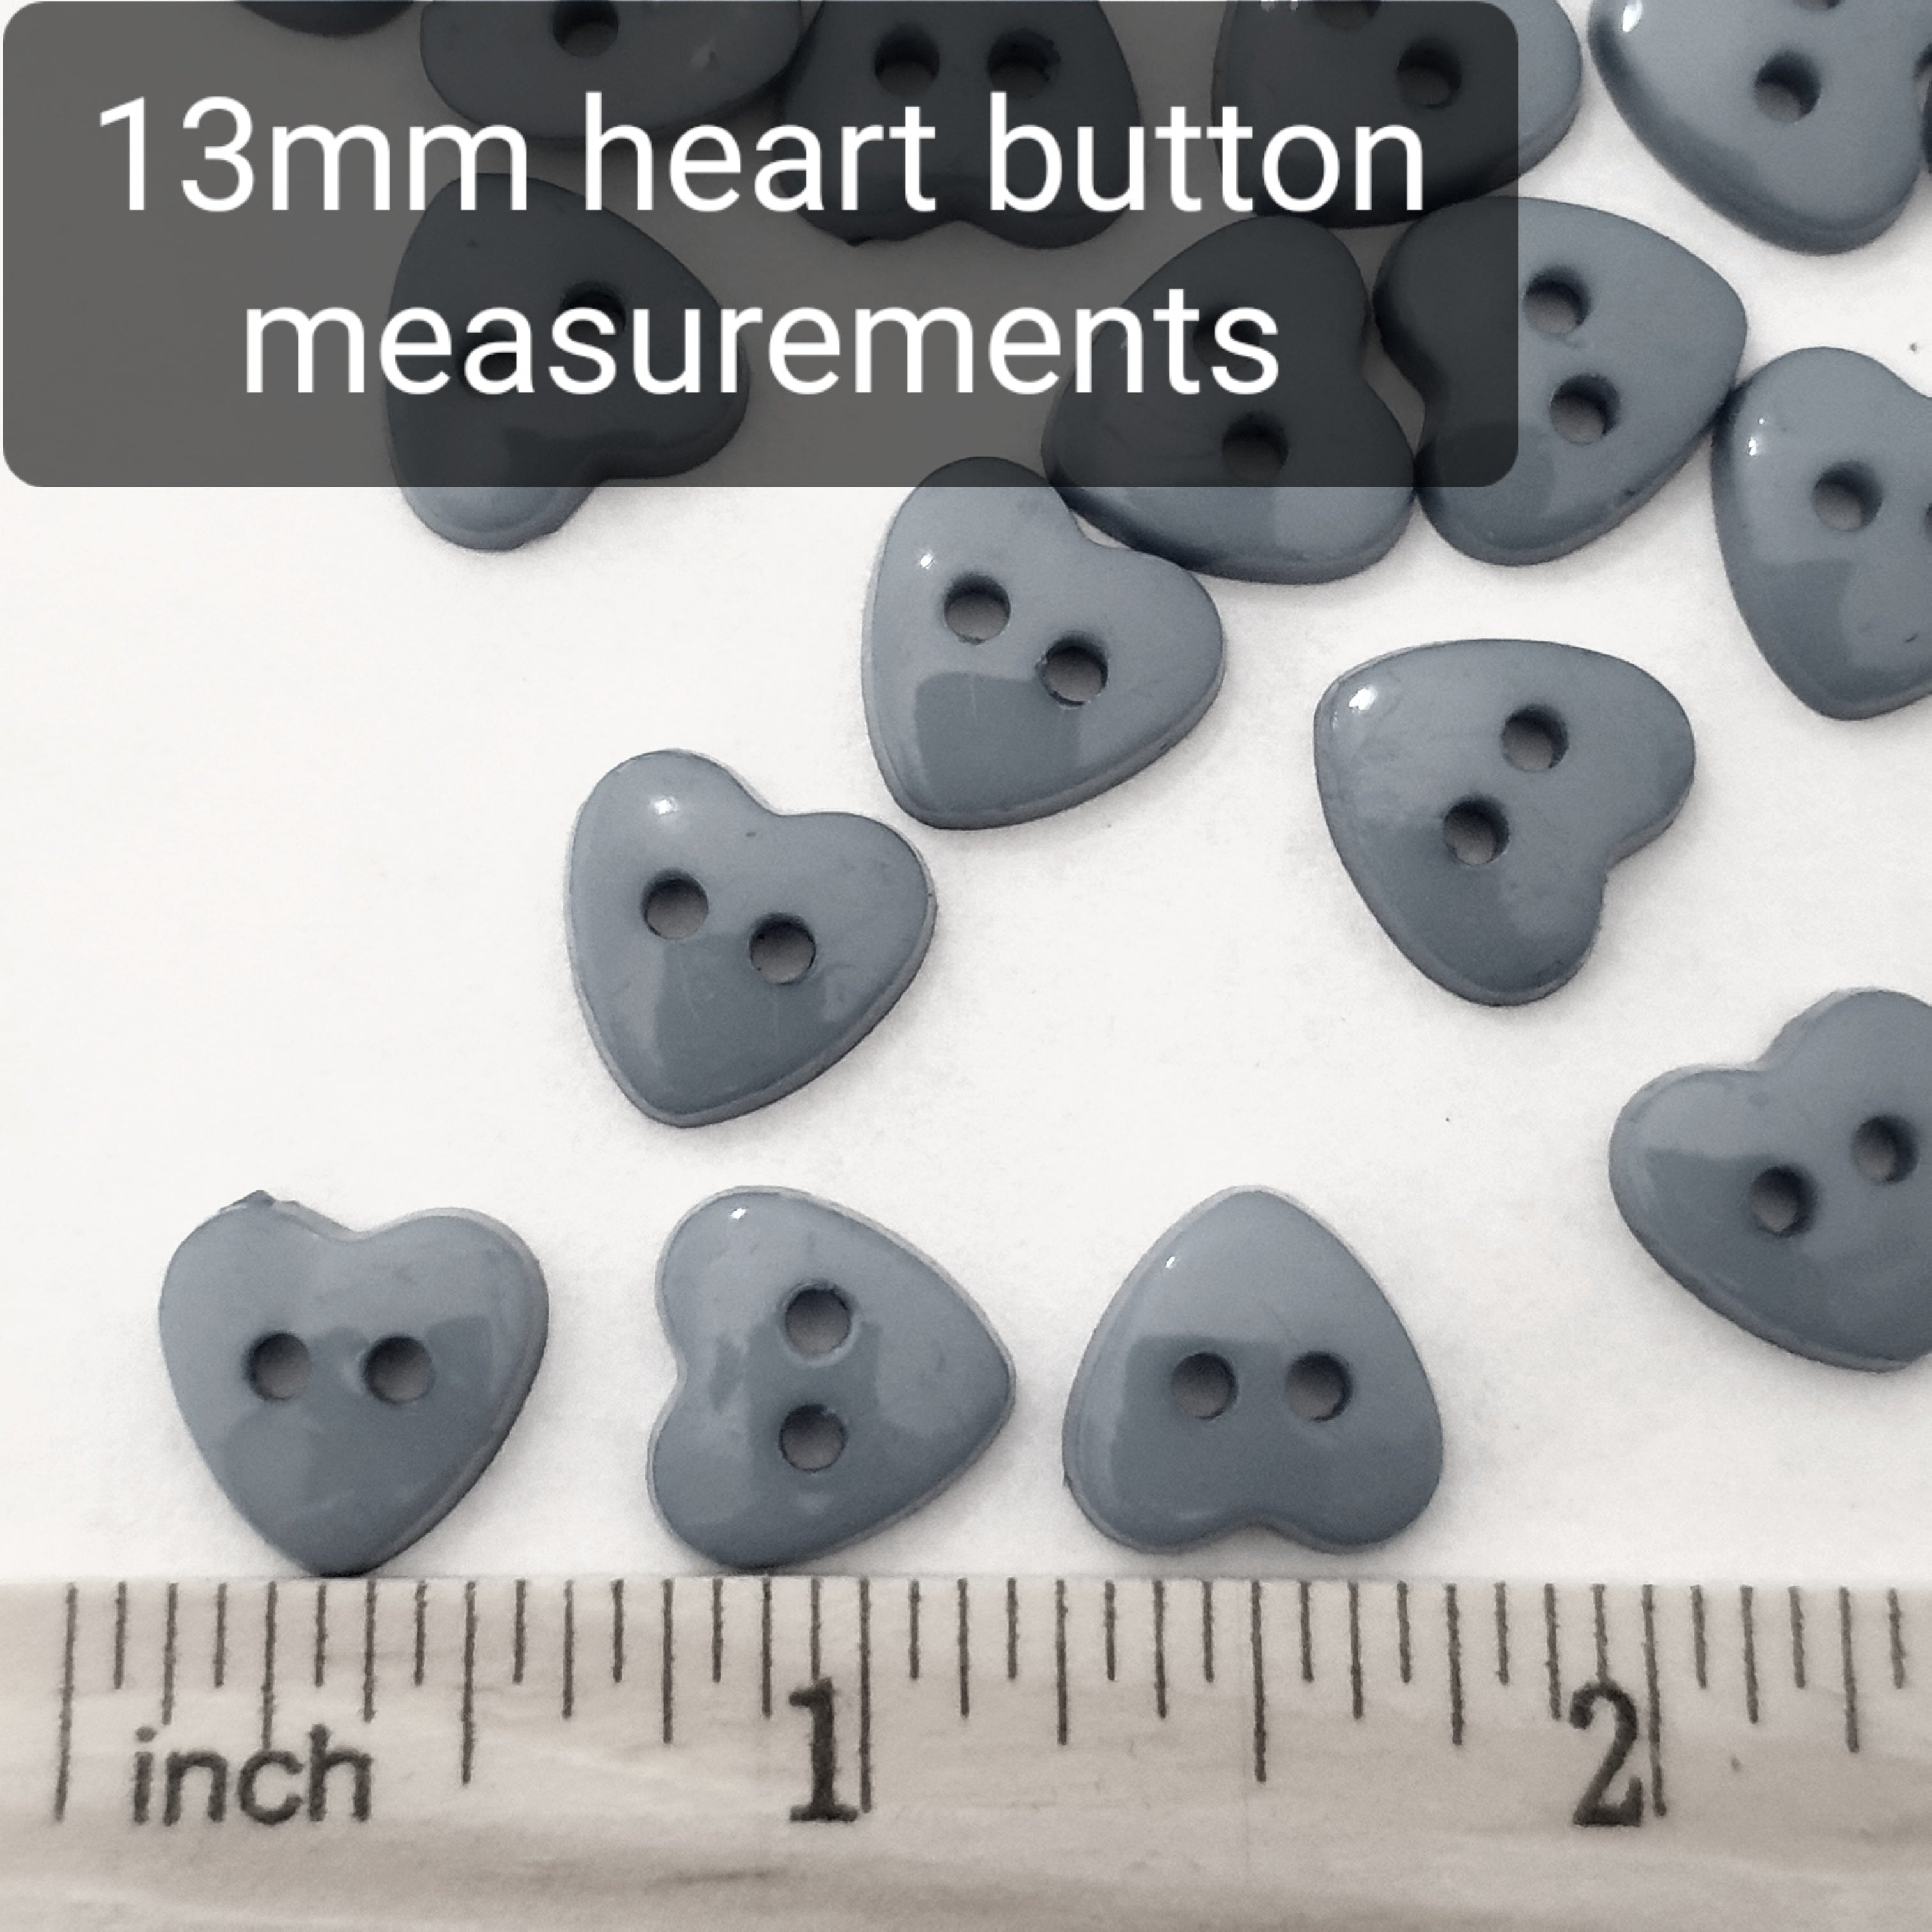 MajorCrafts 60pcs 13mm Bright Yellow Heart Shaped 2 Holes Resin Sewing Buttons